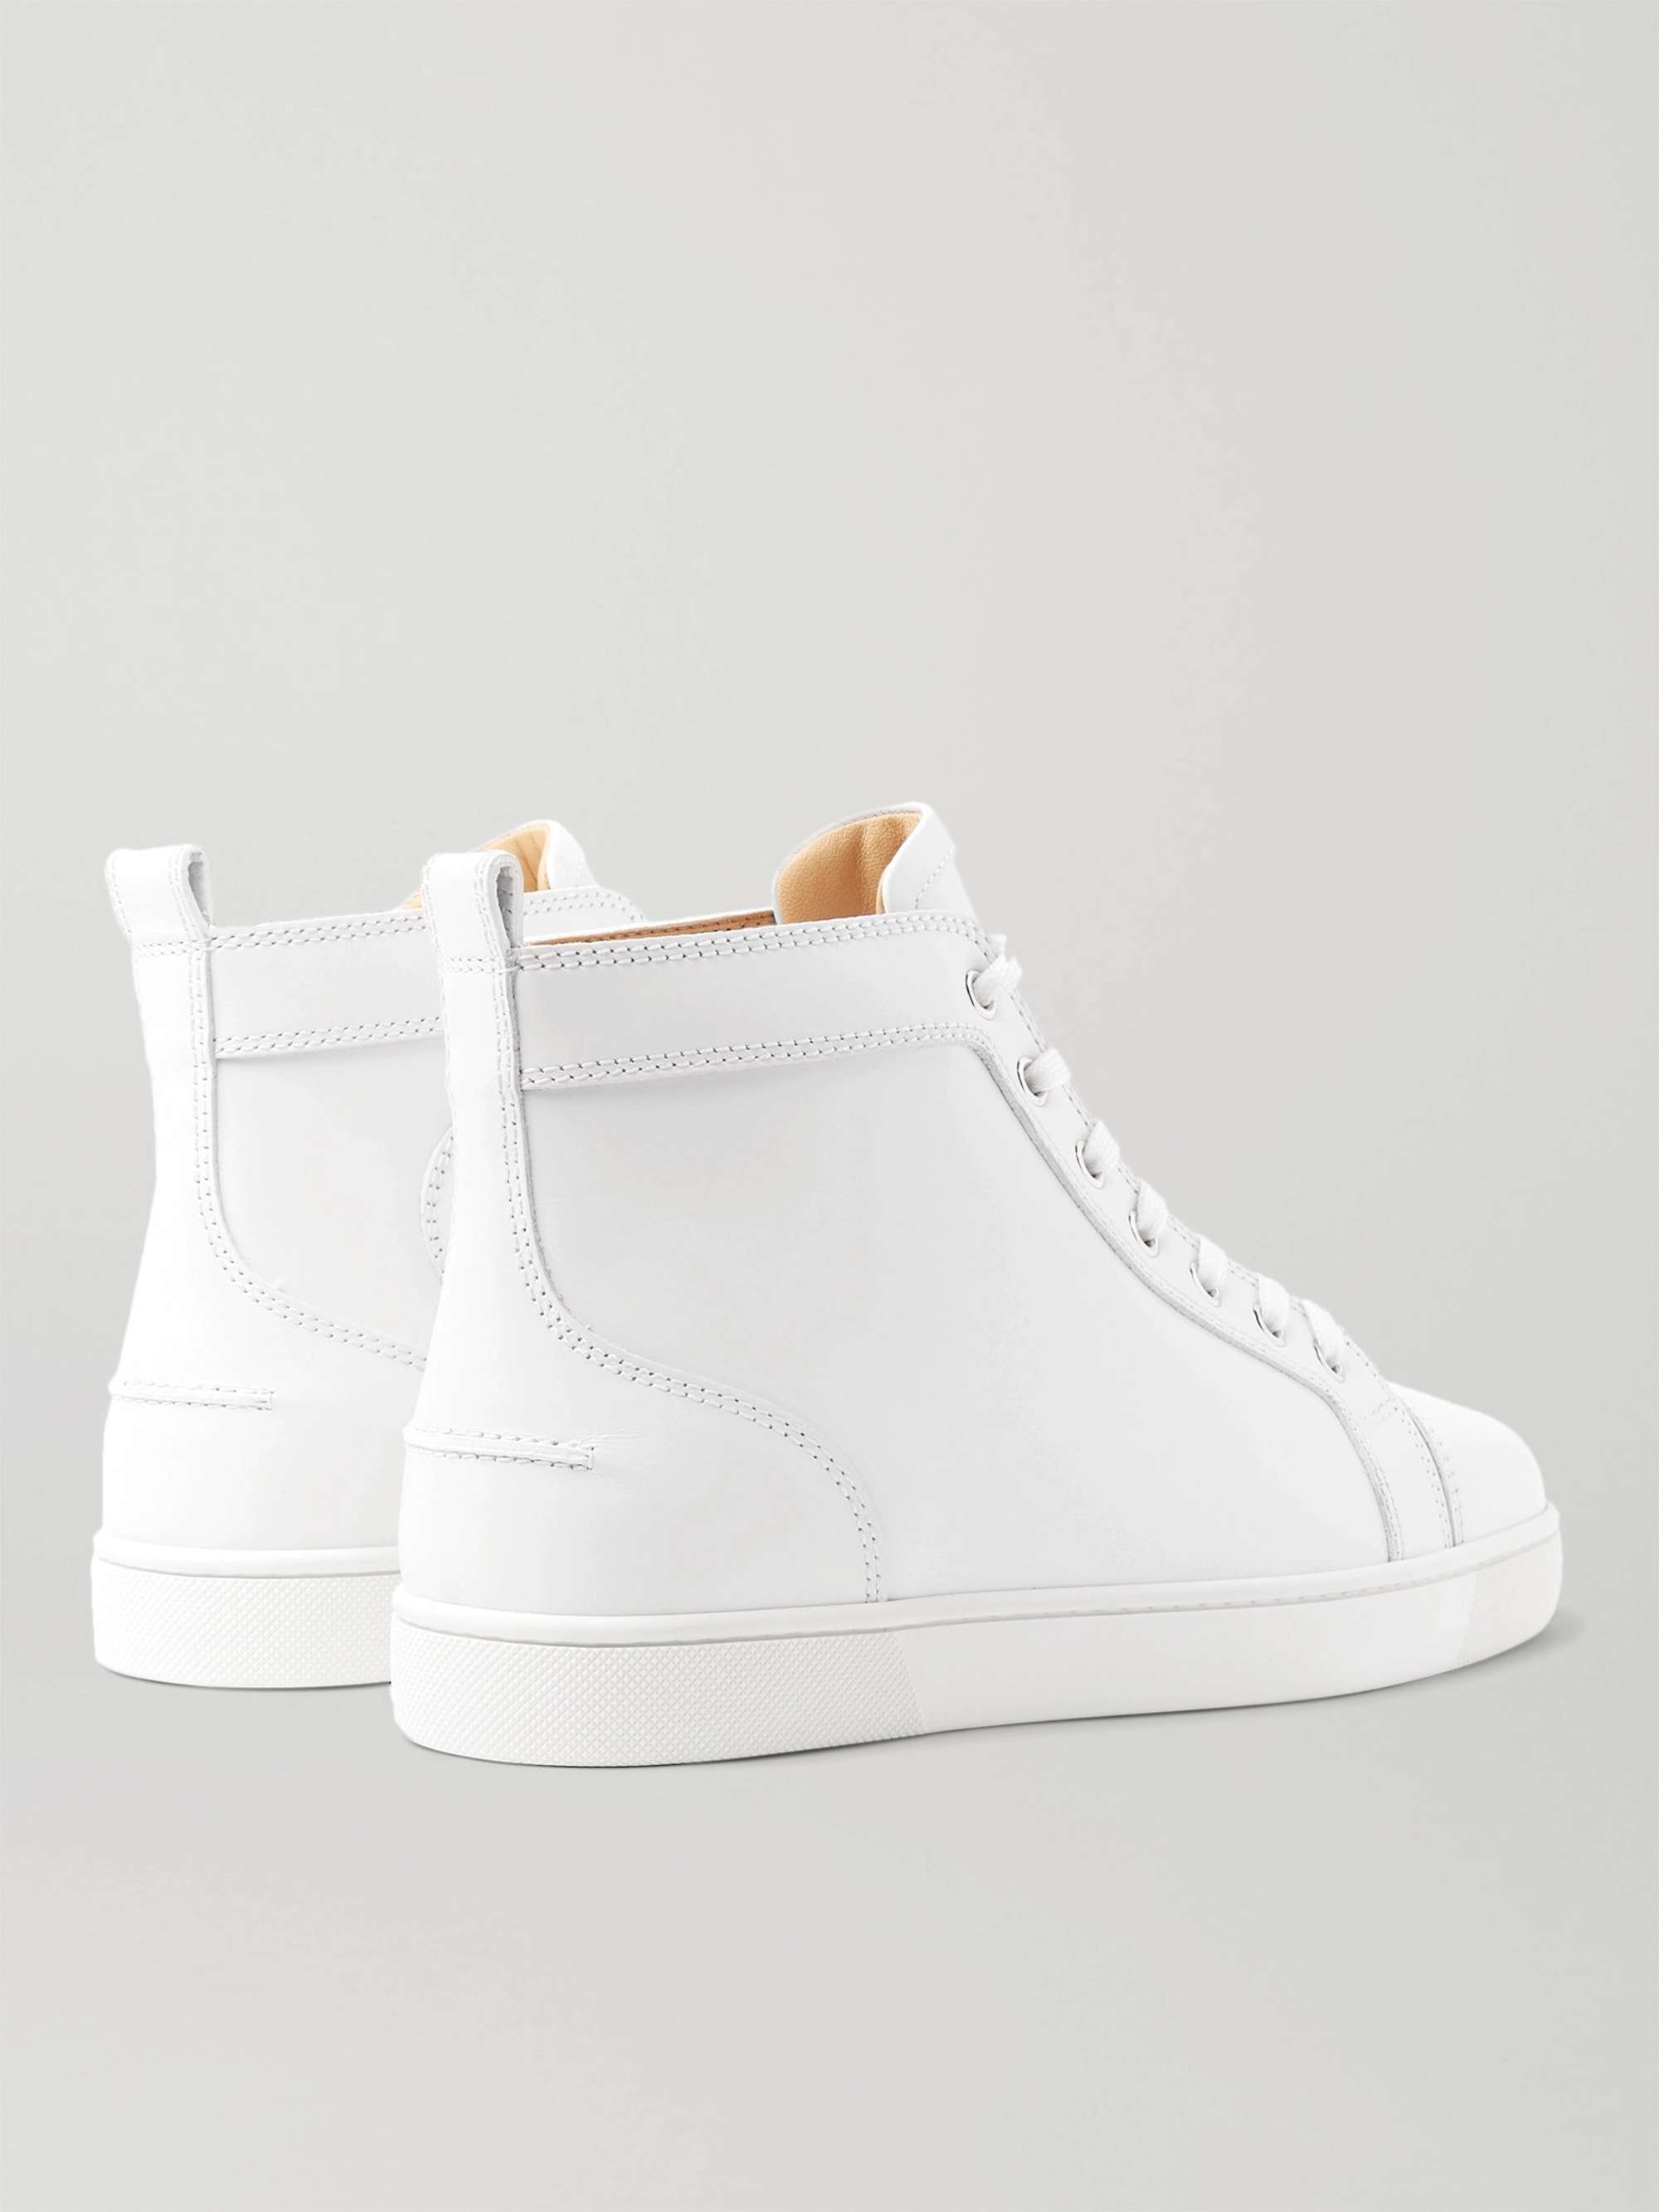 CHRISTIAN LOUBOUTIN Louis Leather High-Top Sneakers